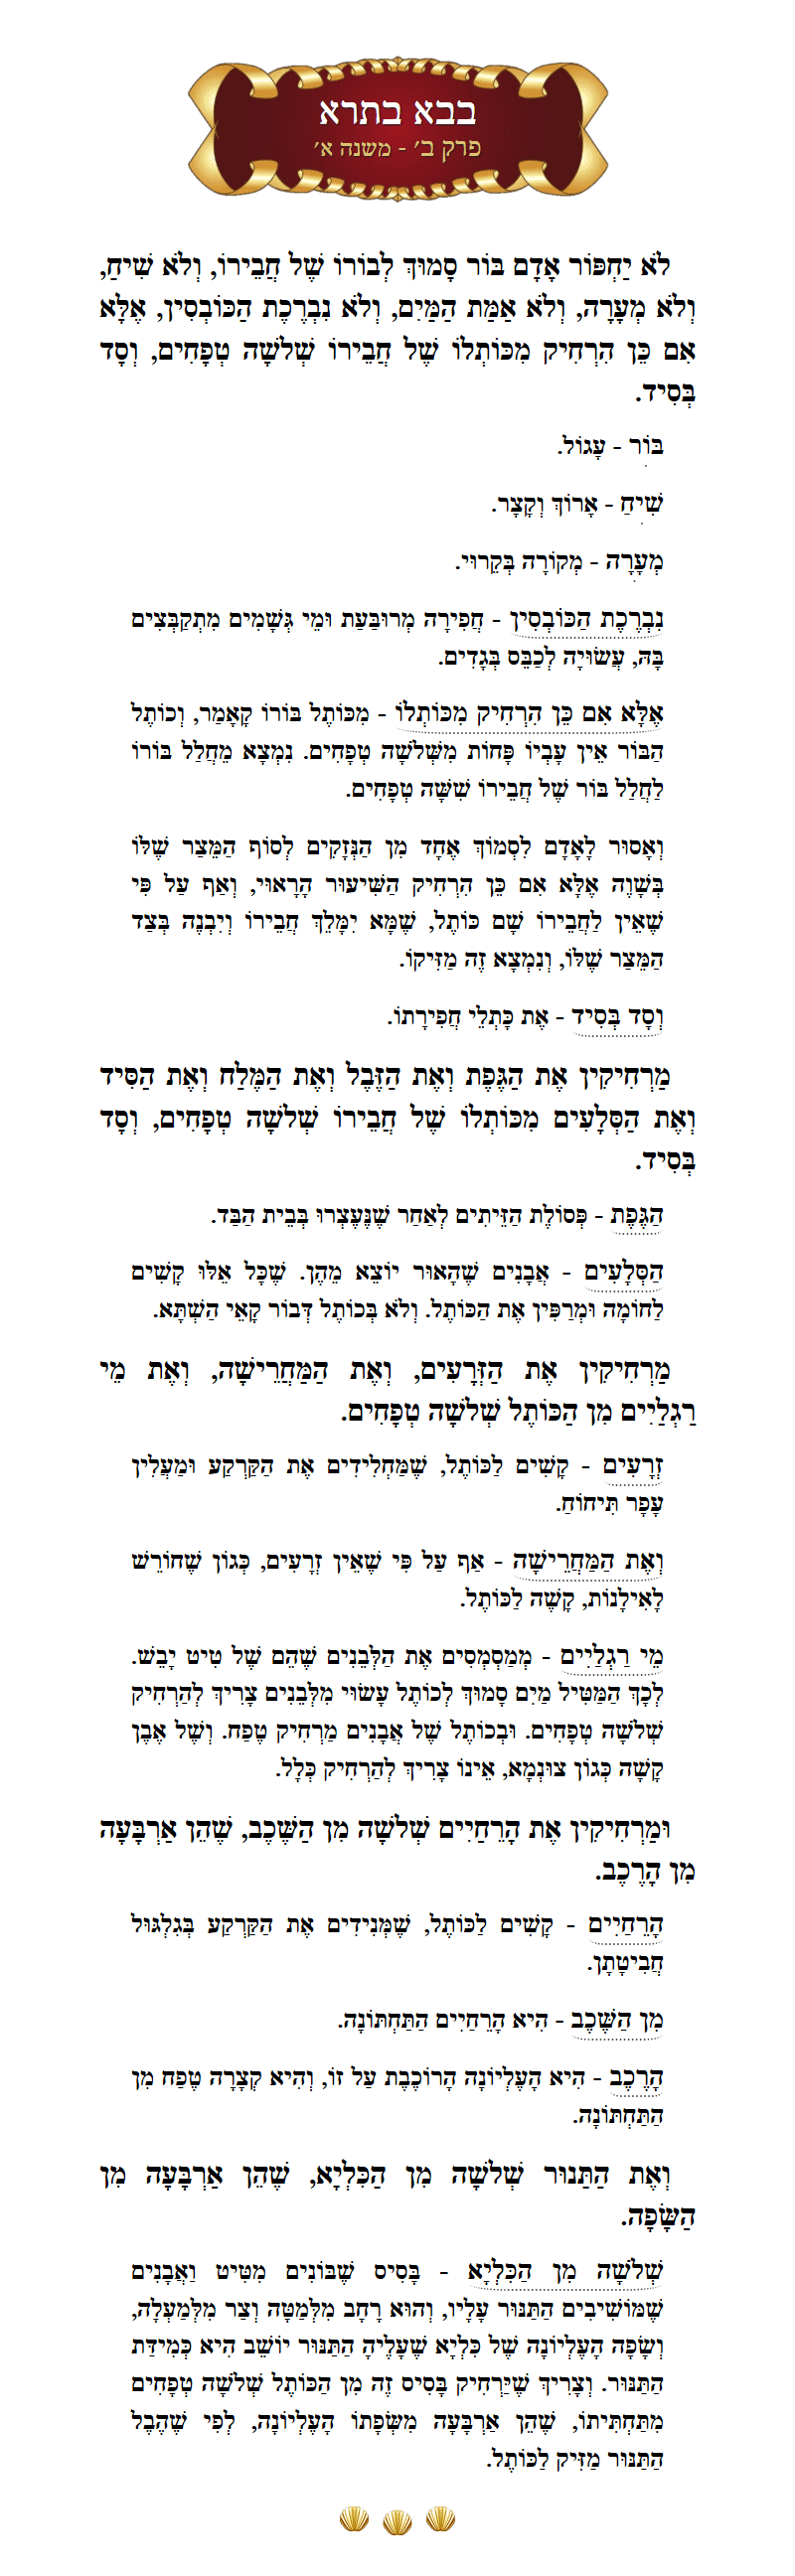 Masechta Bava Basra Chapter 2 Mishnah 1 with commentary